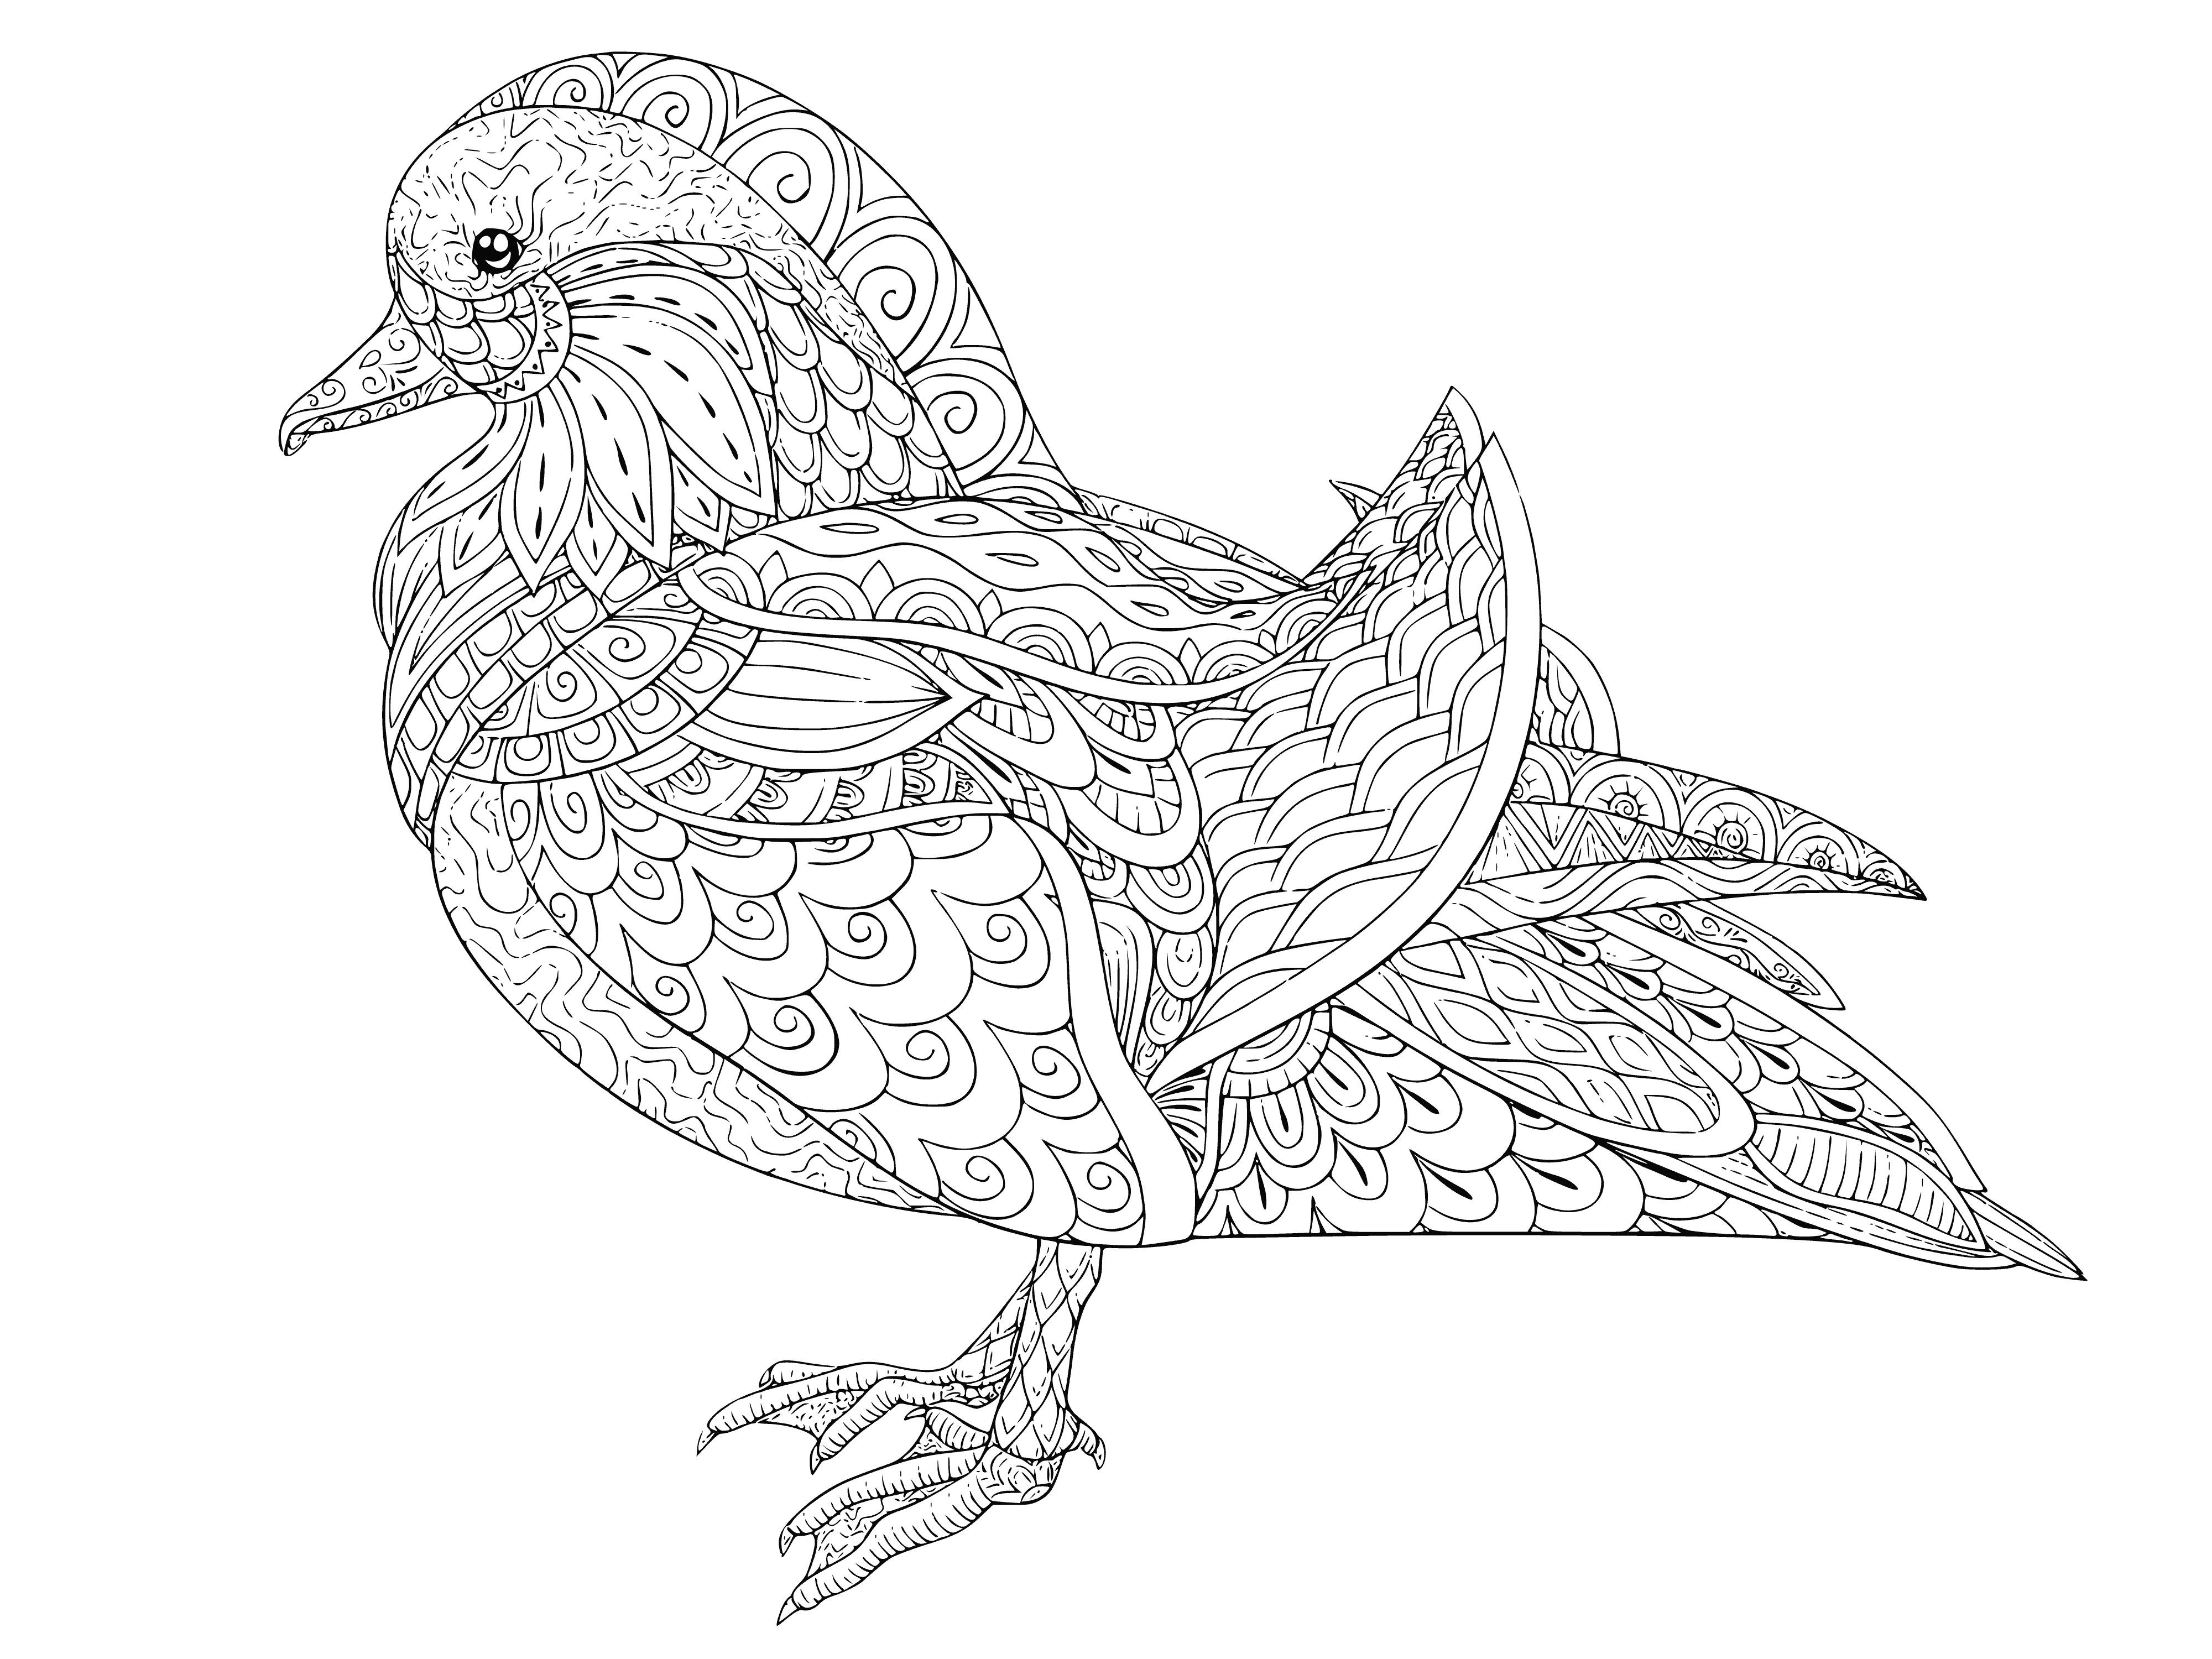 coloring page: A duck floats on a pond surrounded by lily pads, lotus flowers, and reeds. Its bill yellow, head green, body white with black spots.